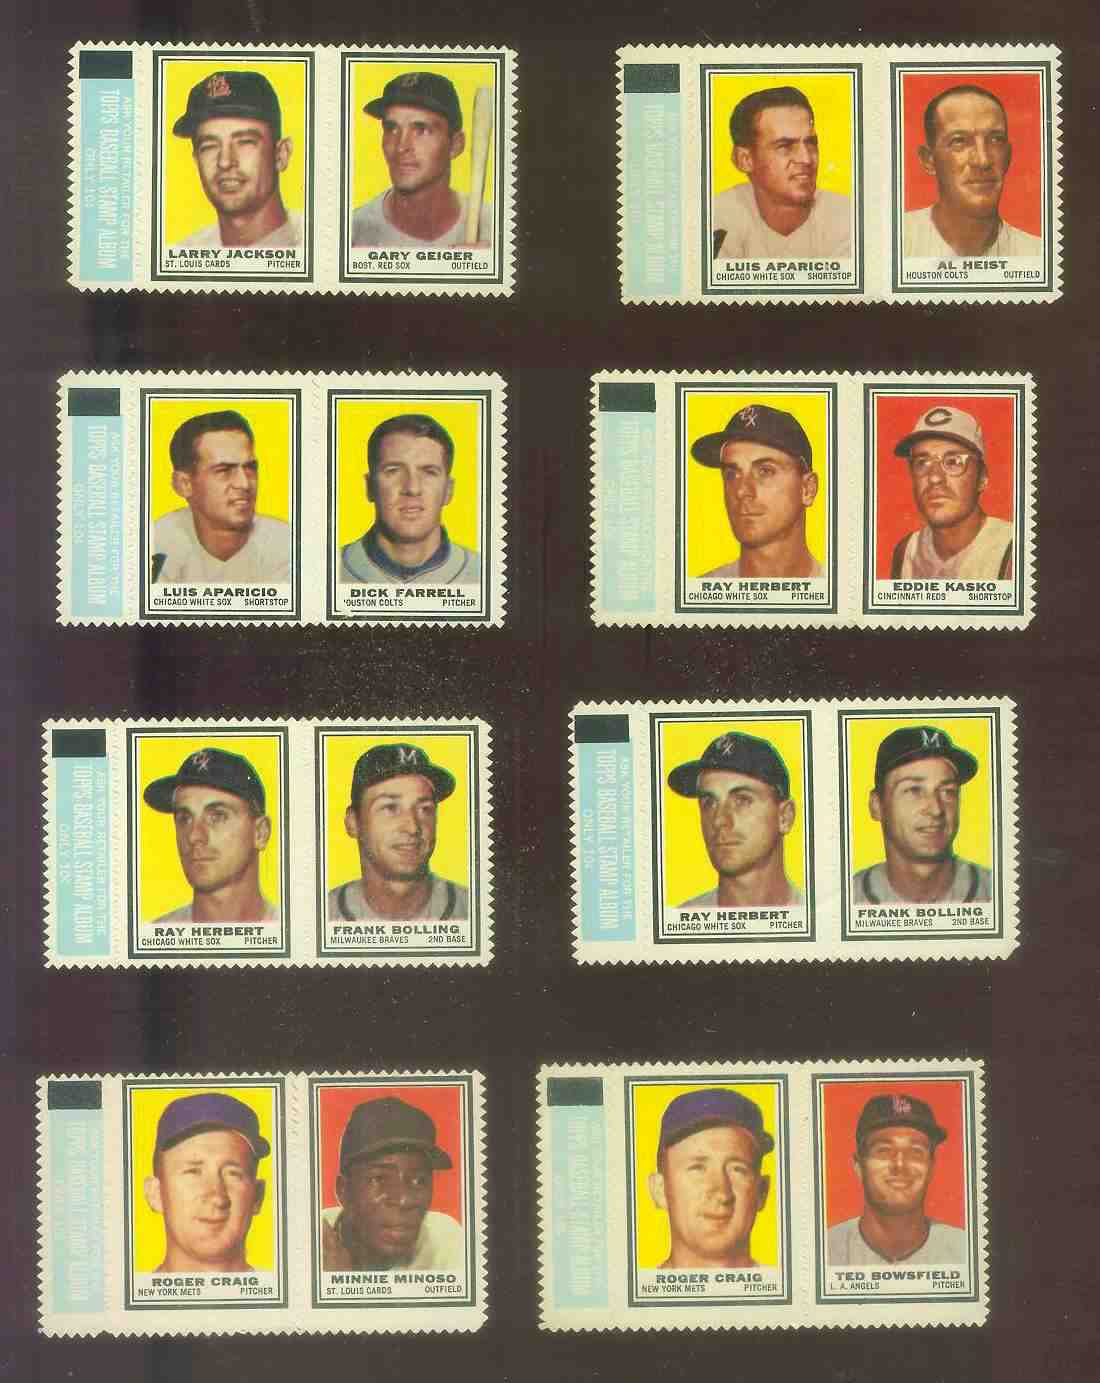   Larry Jackson/Gary Geiger - 1962 Topps STAMP PANEL with TAB !!! Baseball cards value